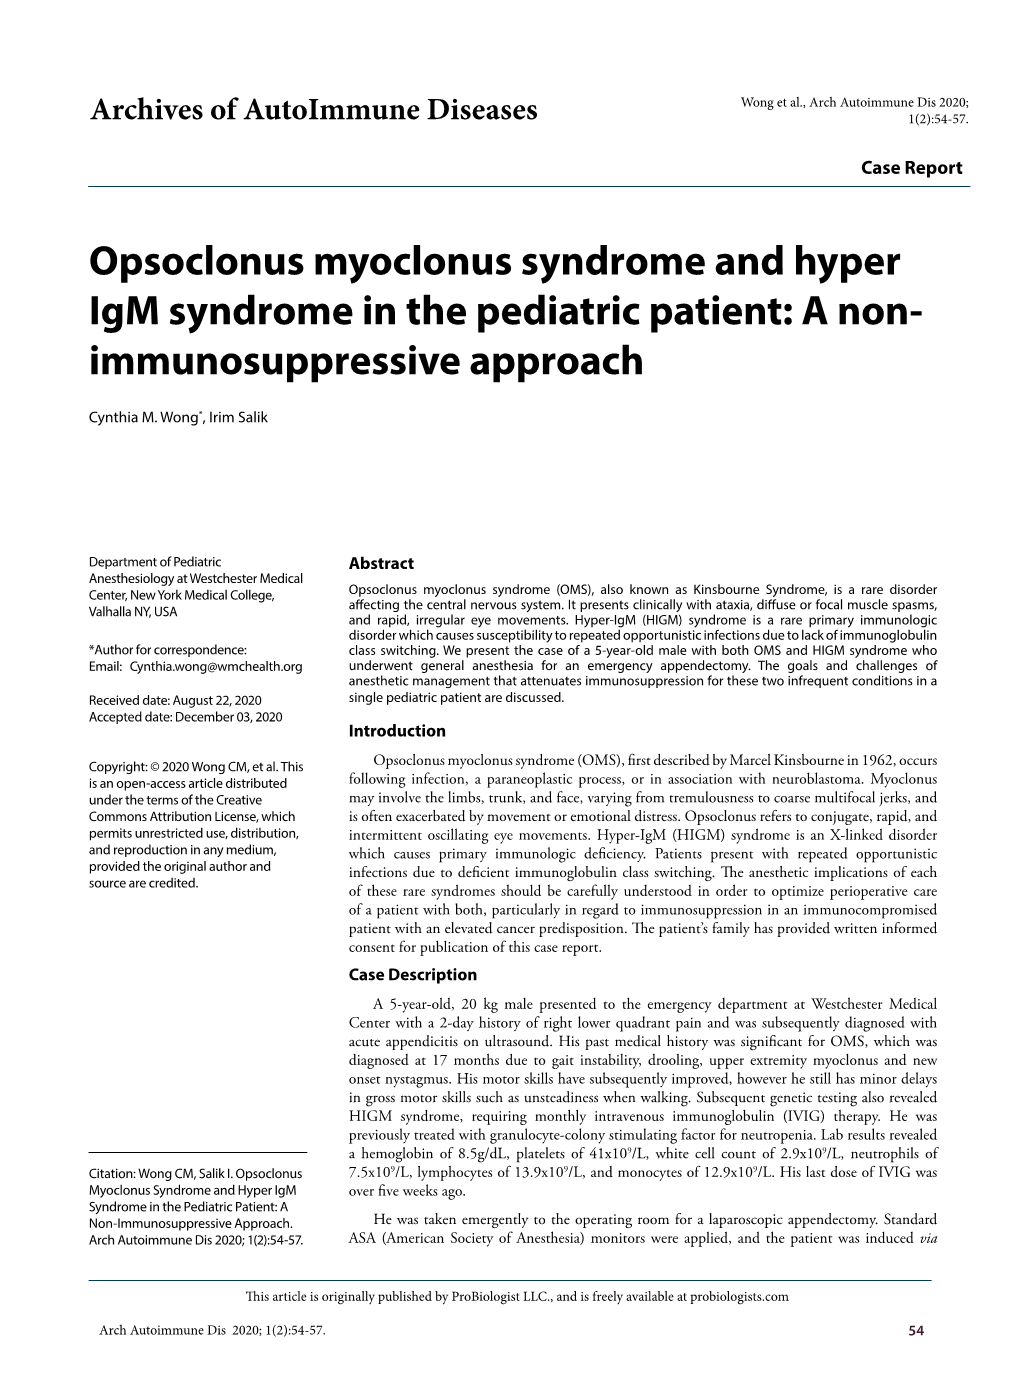 Opsoclonus Myoclonus Syndrome and Hyper Igm Syndrome in the Pediatric Patient: a Non- Immunosuppressive Approach